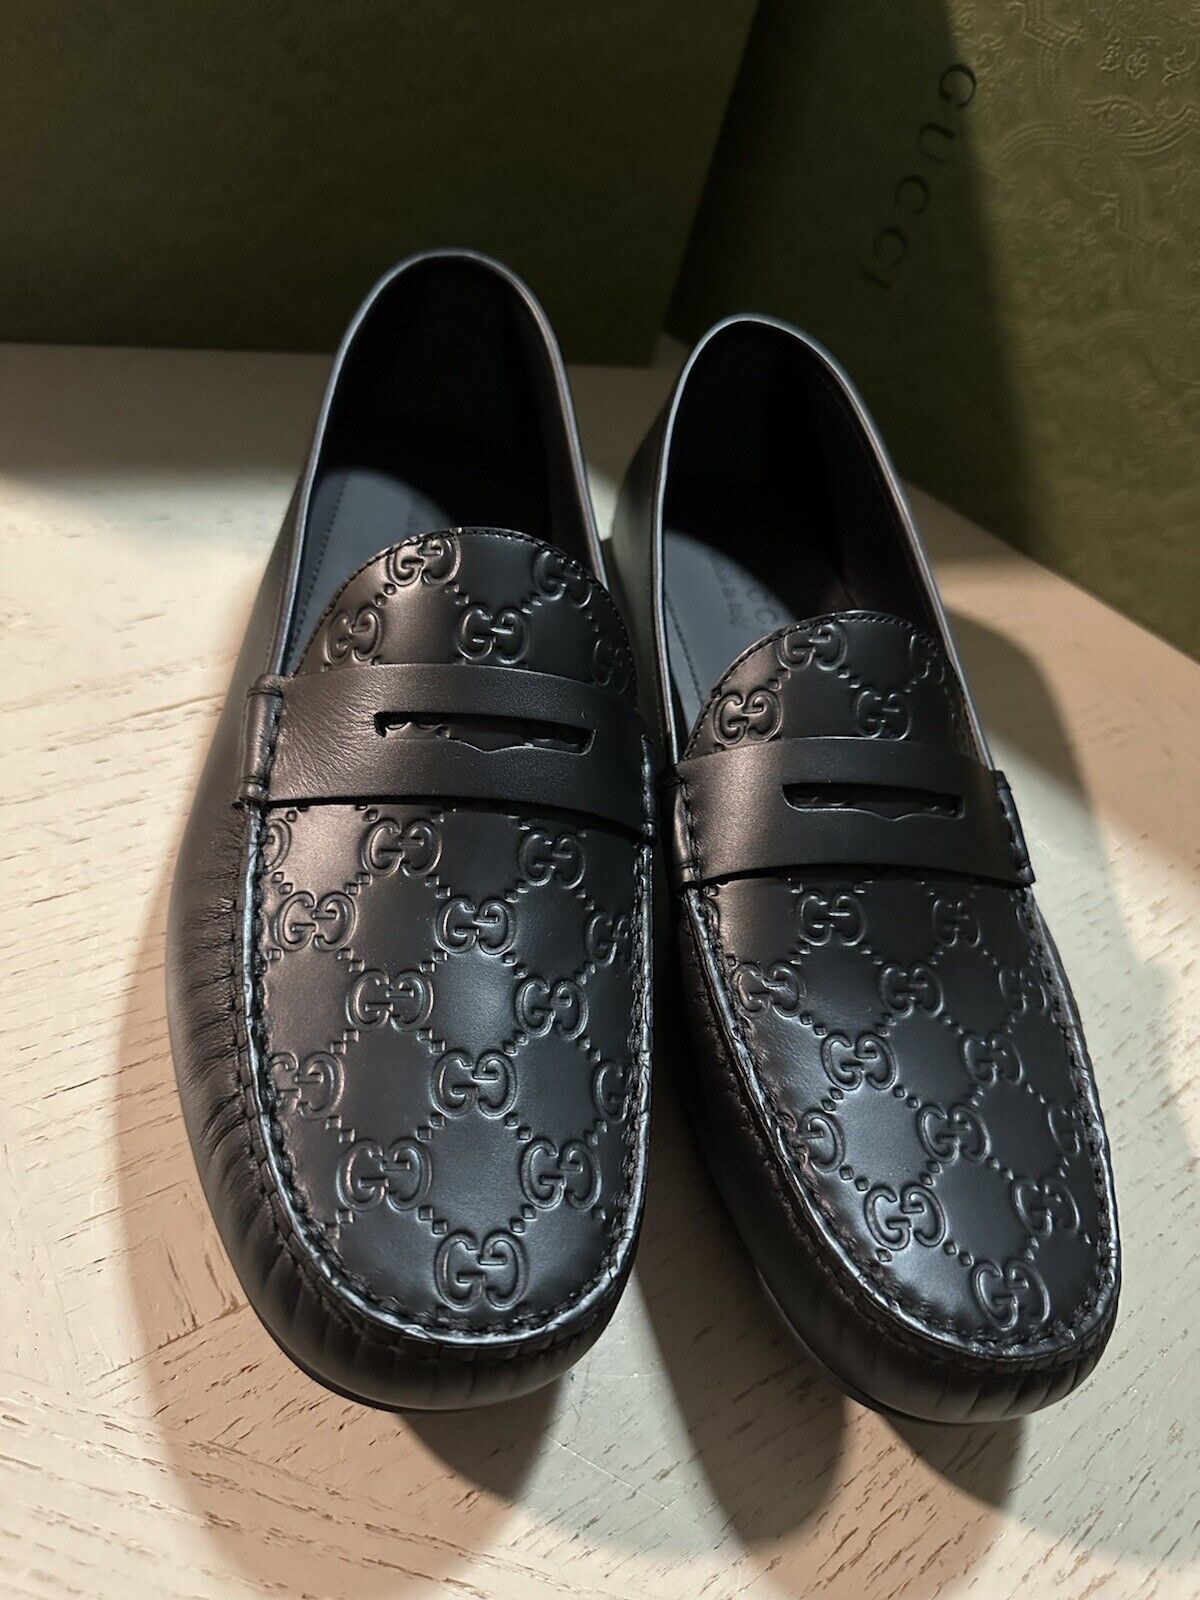 Gucci Men Leather GG Signature Driver Loafers Shoes Black 13 US/12.5 UK New